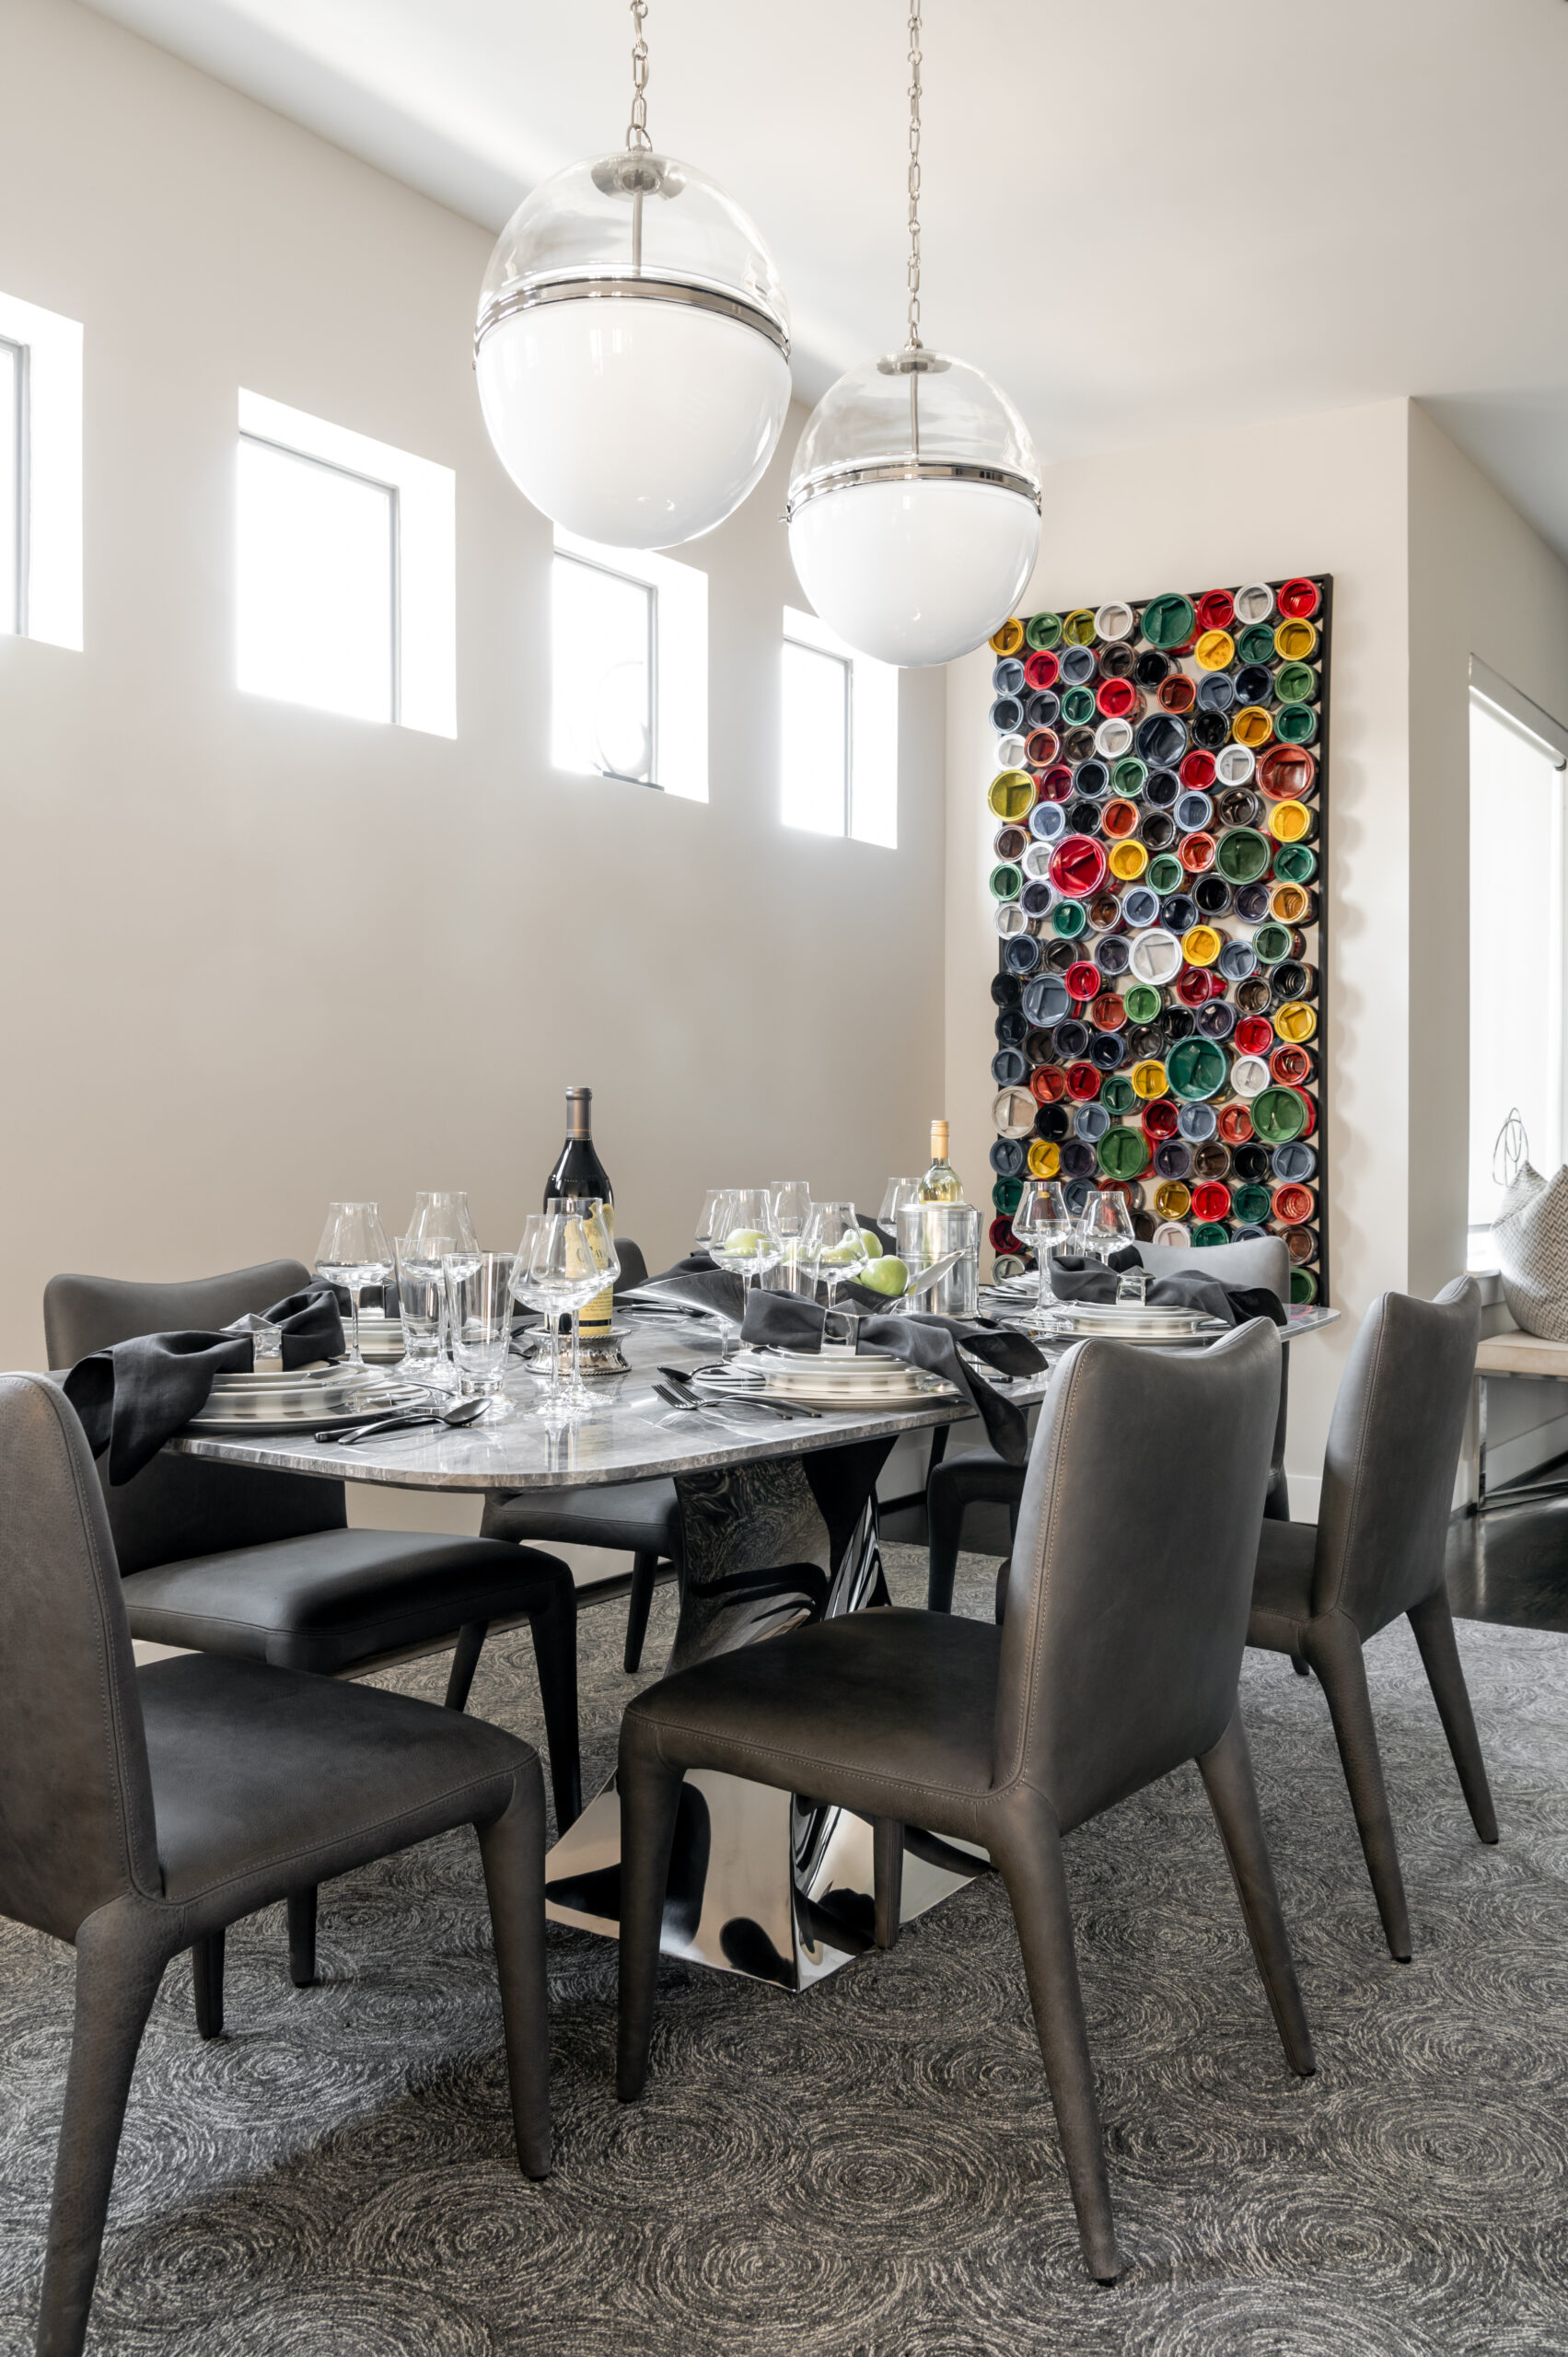 Dining room interior design with funky wall art